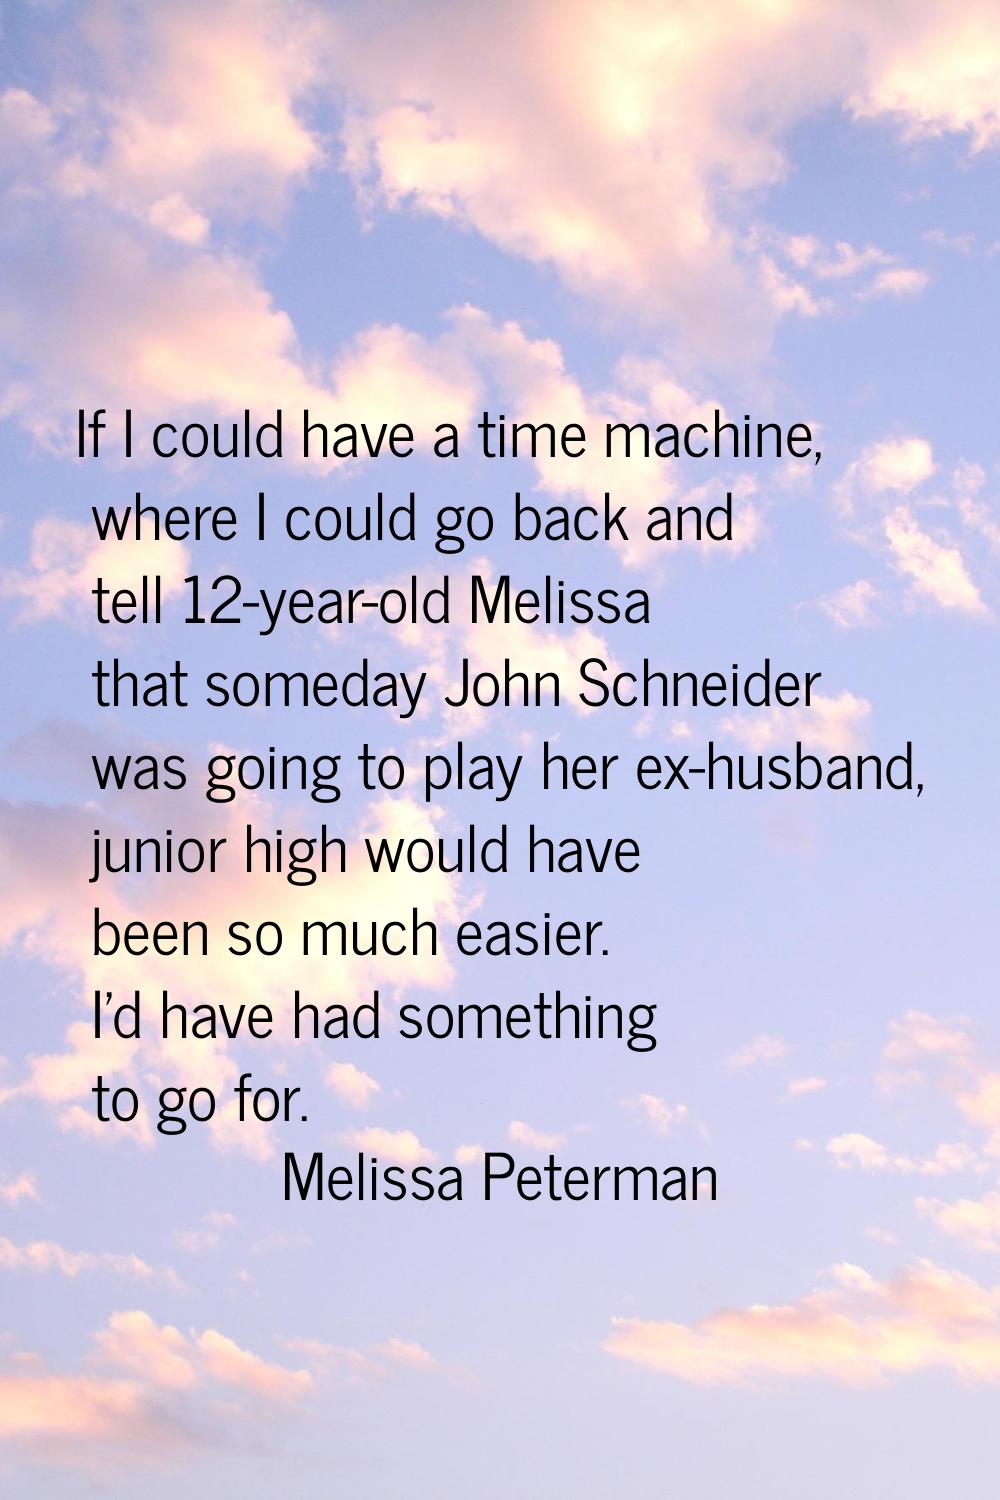 If I could have a time machine, where I could go back and tell 12-year-old Melissa that someday Joh